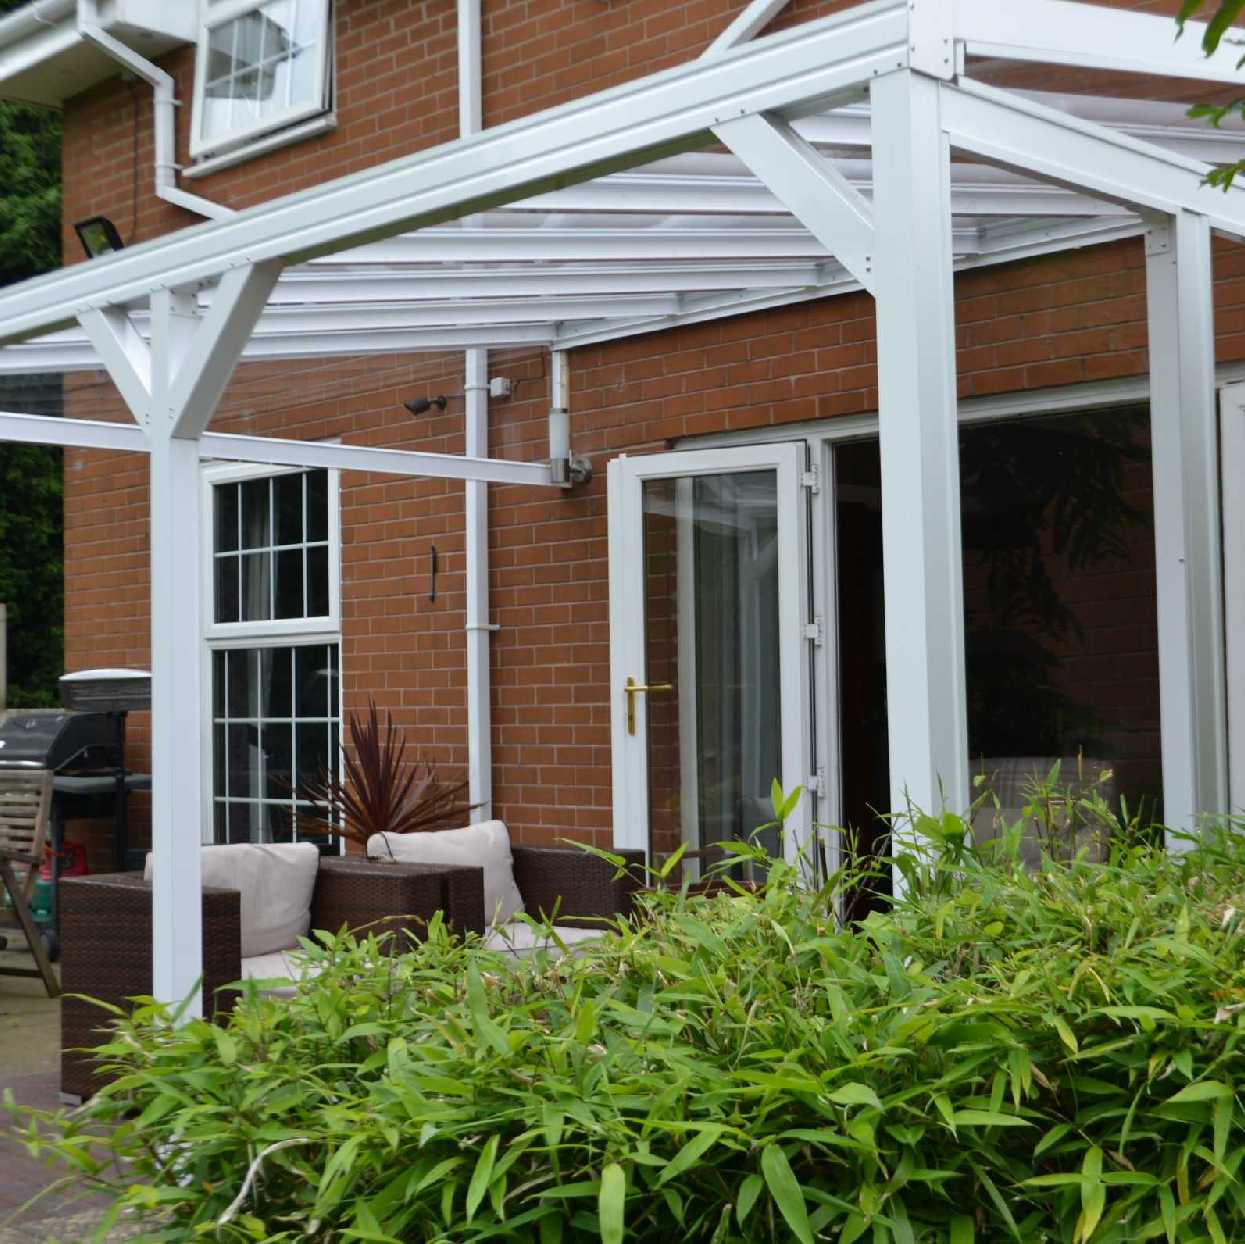 Omega Smart Lean-To Canopy, White with 6mm Glass Clear Plate Polycarbonate Glazing - 2.8m (W) x 3.5m (P), (2) Supporting Posts from Omega Build